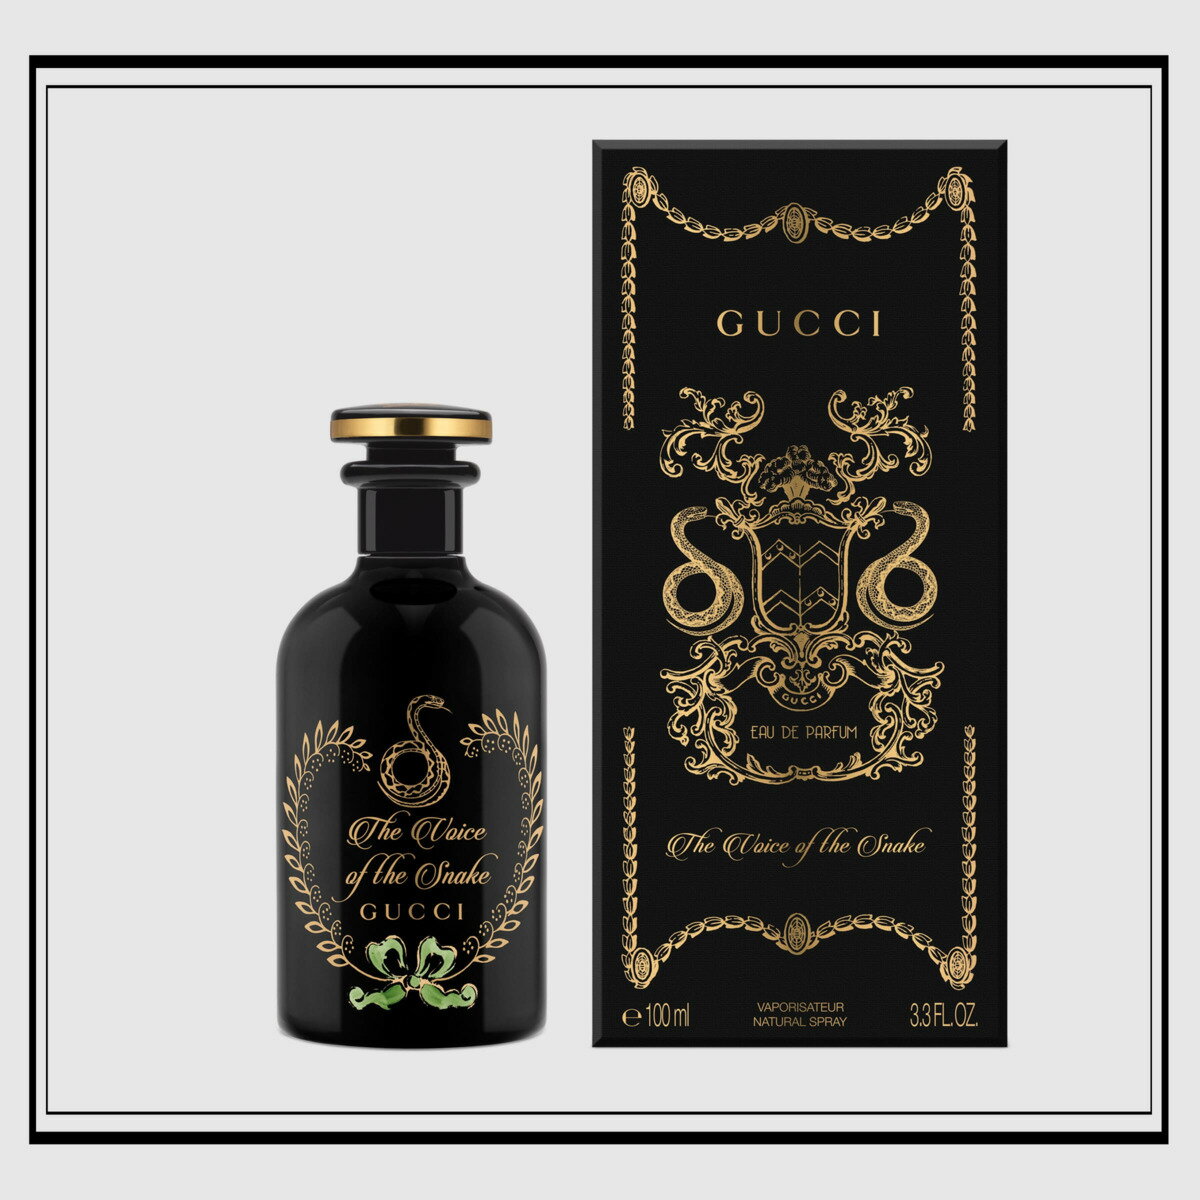 Gucci グッチ ボイス オブ スネーク EDP 100ml The Voice of the Snake Oud